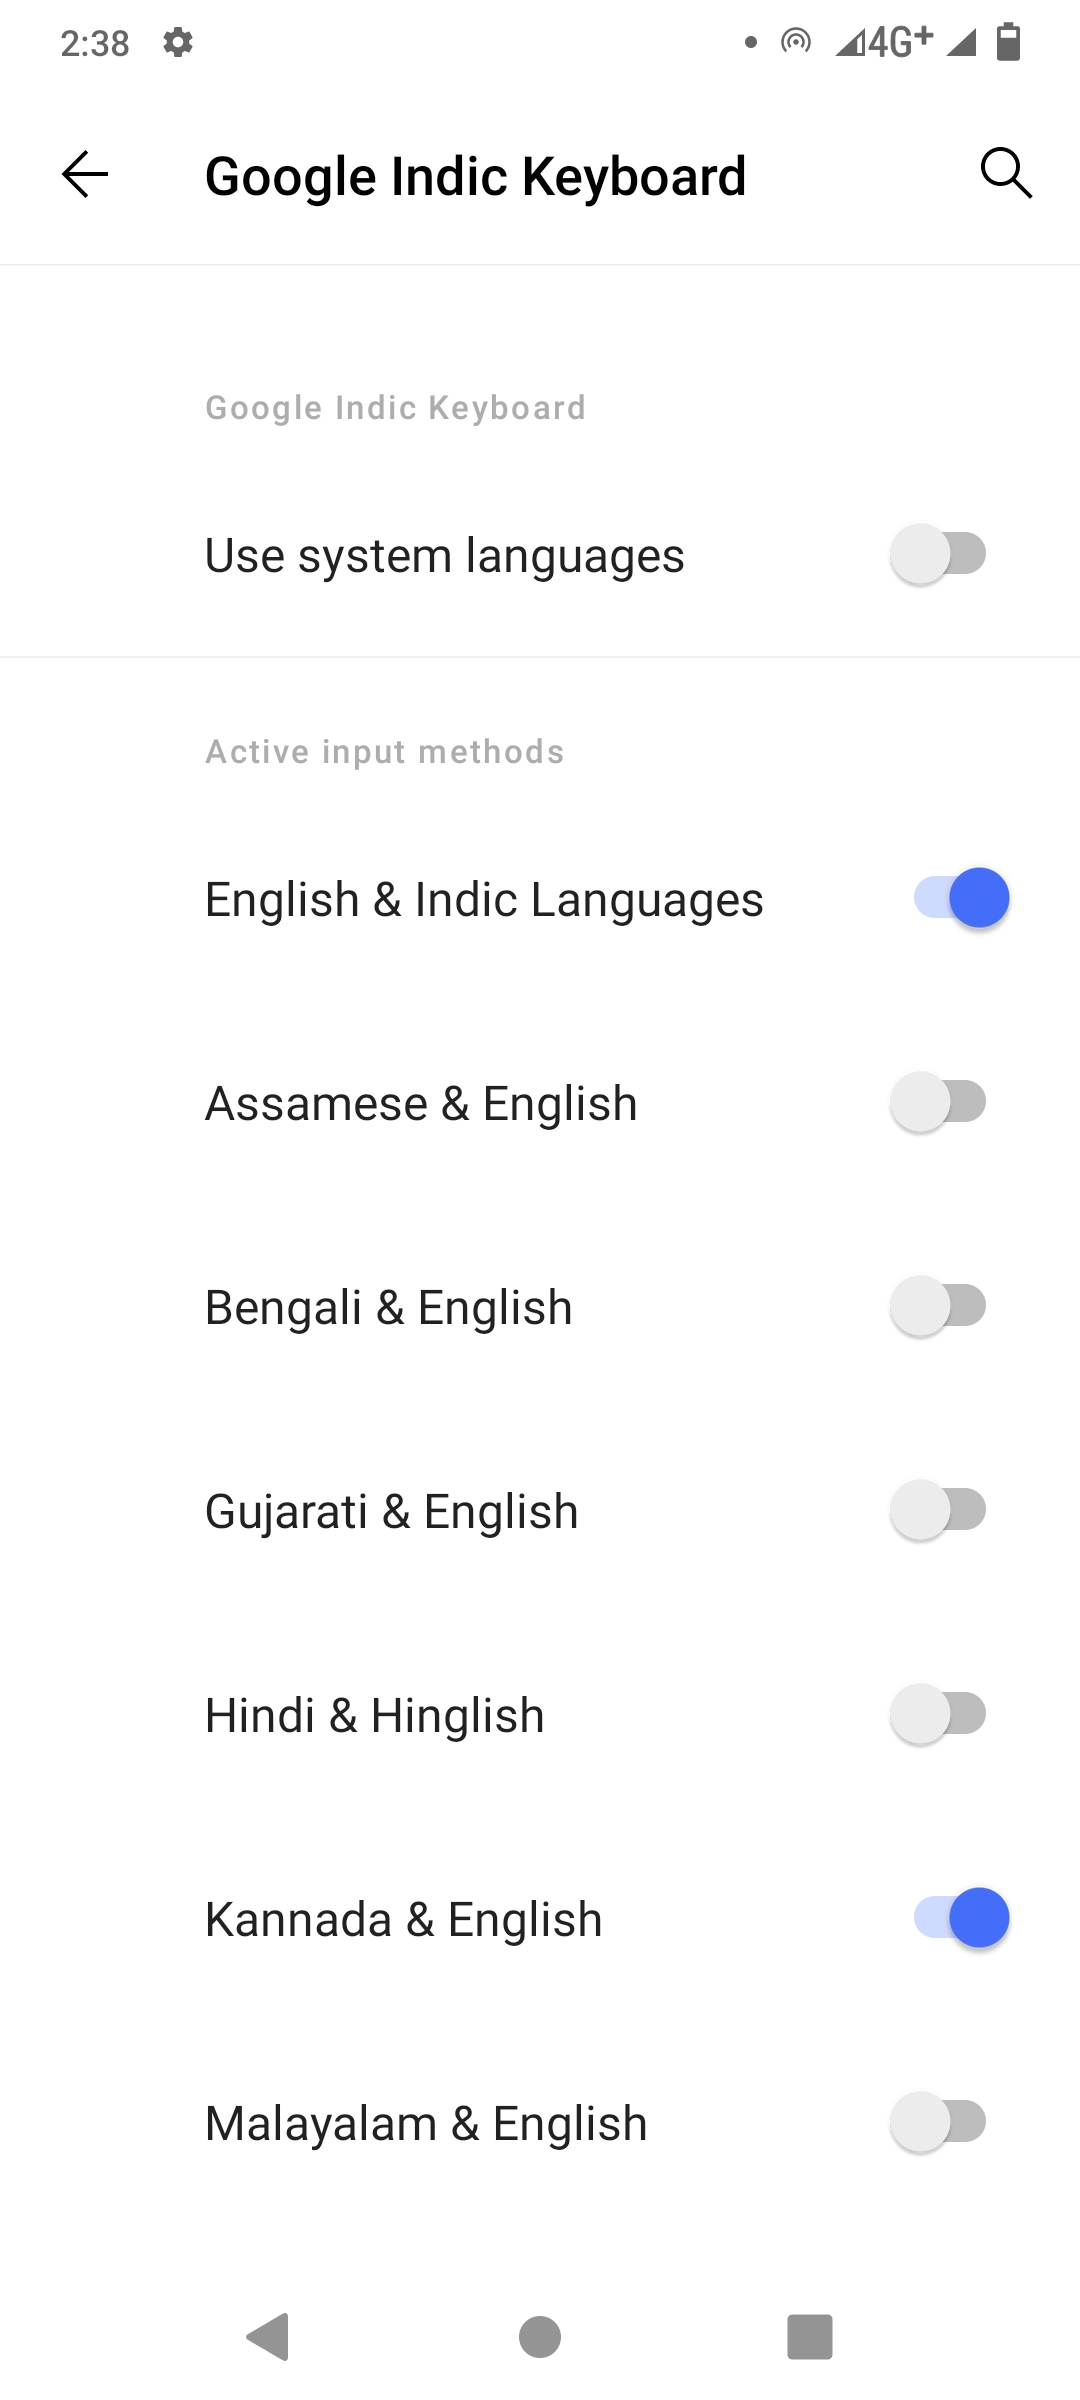 How to enable Kannada keyboard in mobile phone